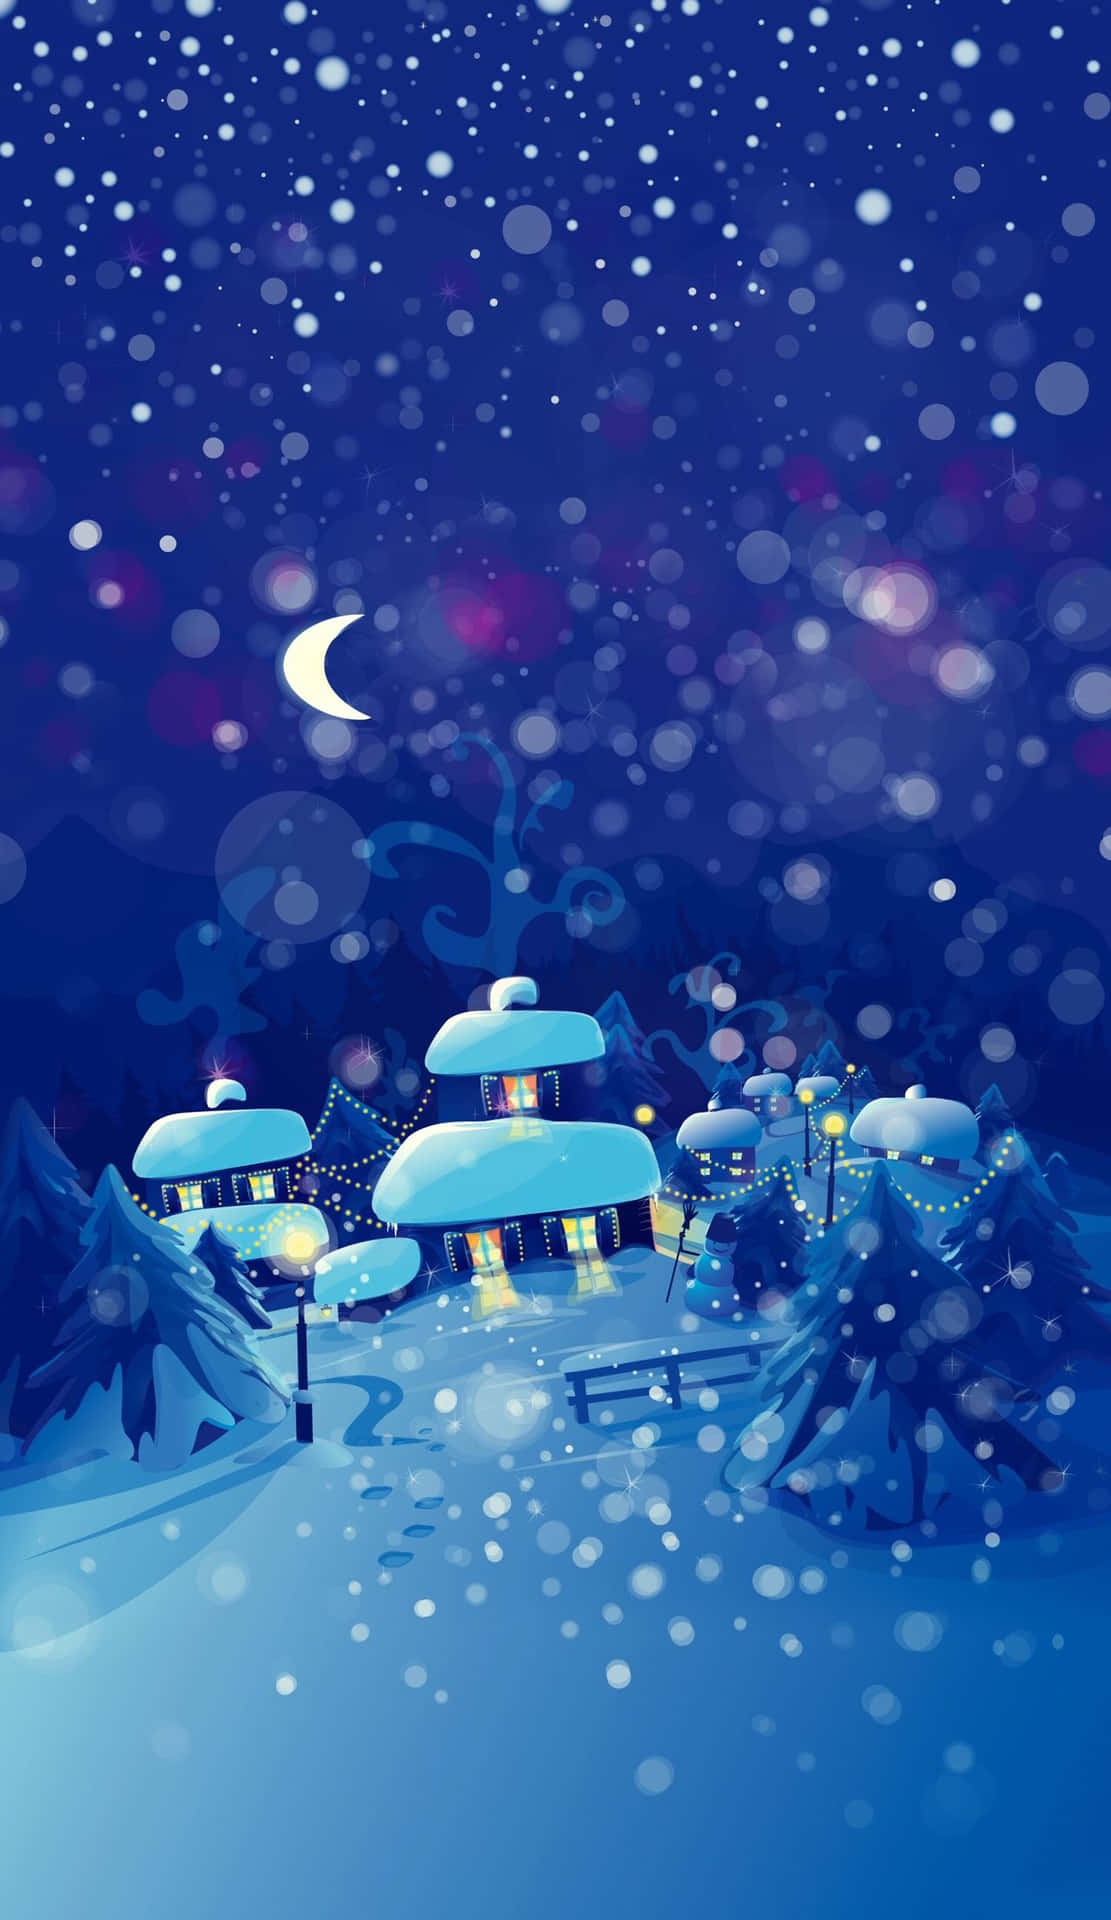 Come join us in this magical Christmas Winter Wonderland! Wallpaper